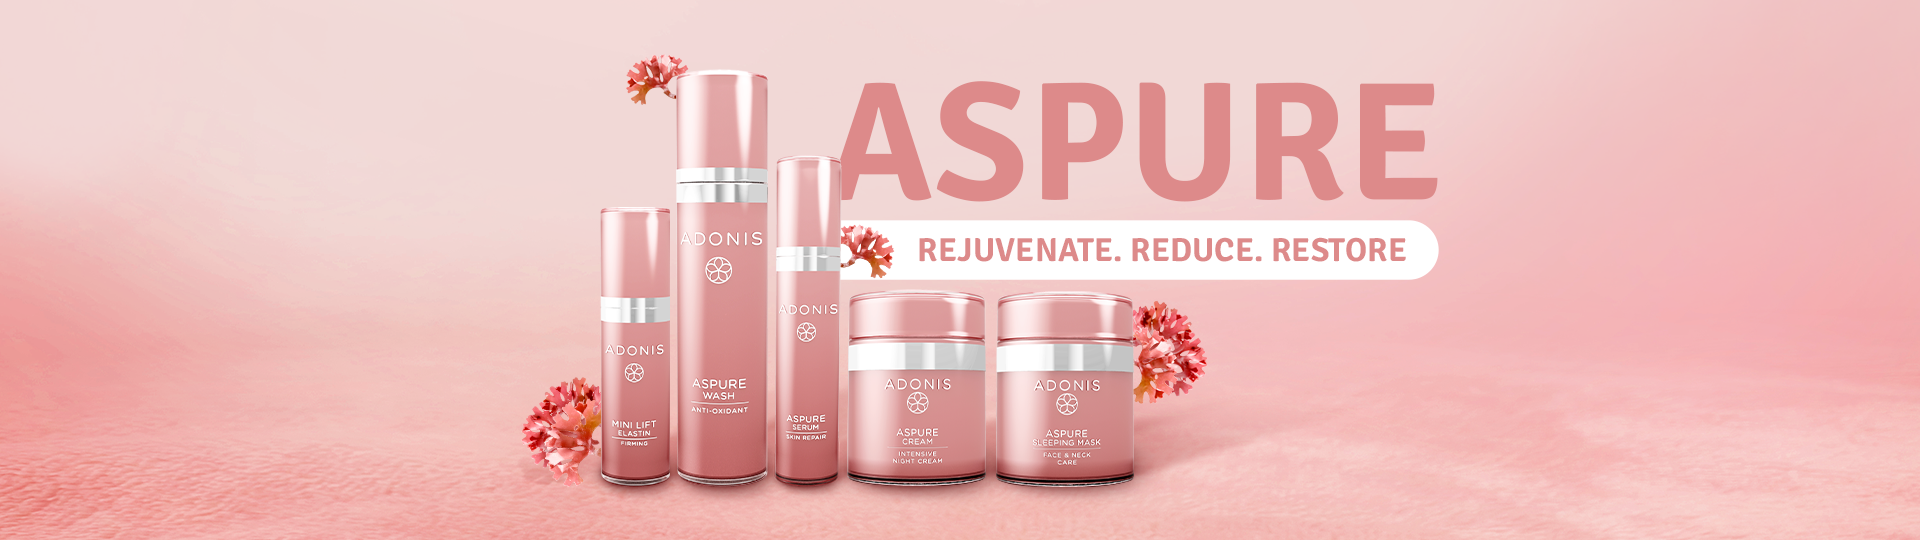 aspure_product_banner